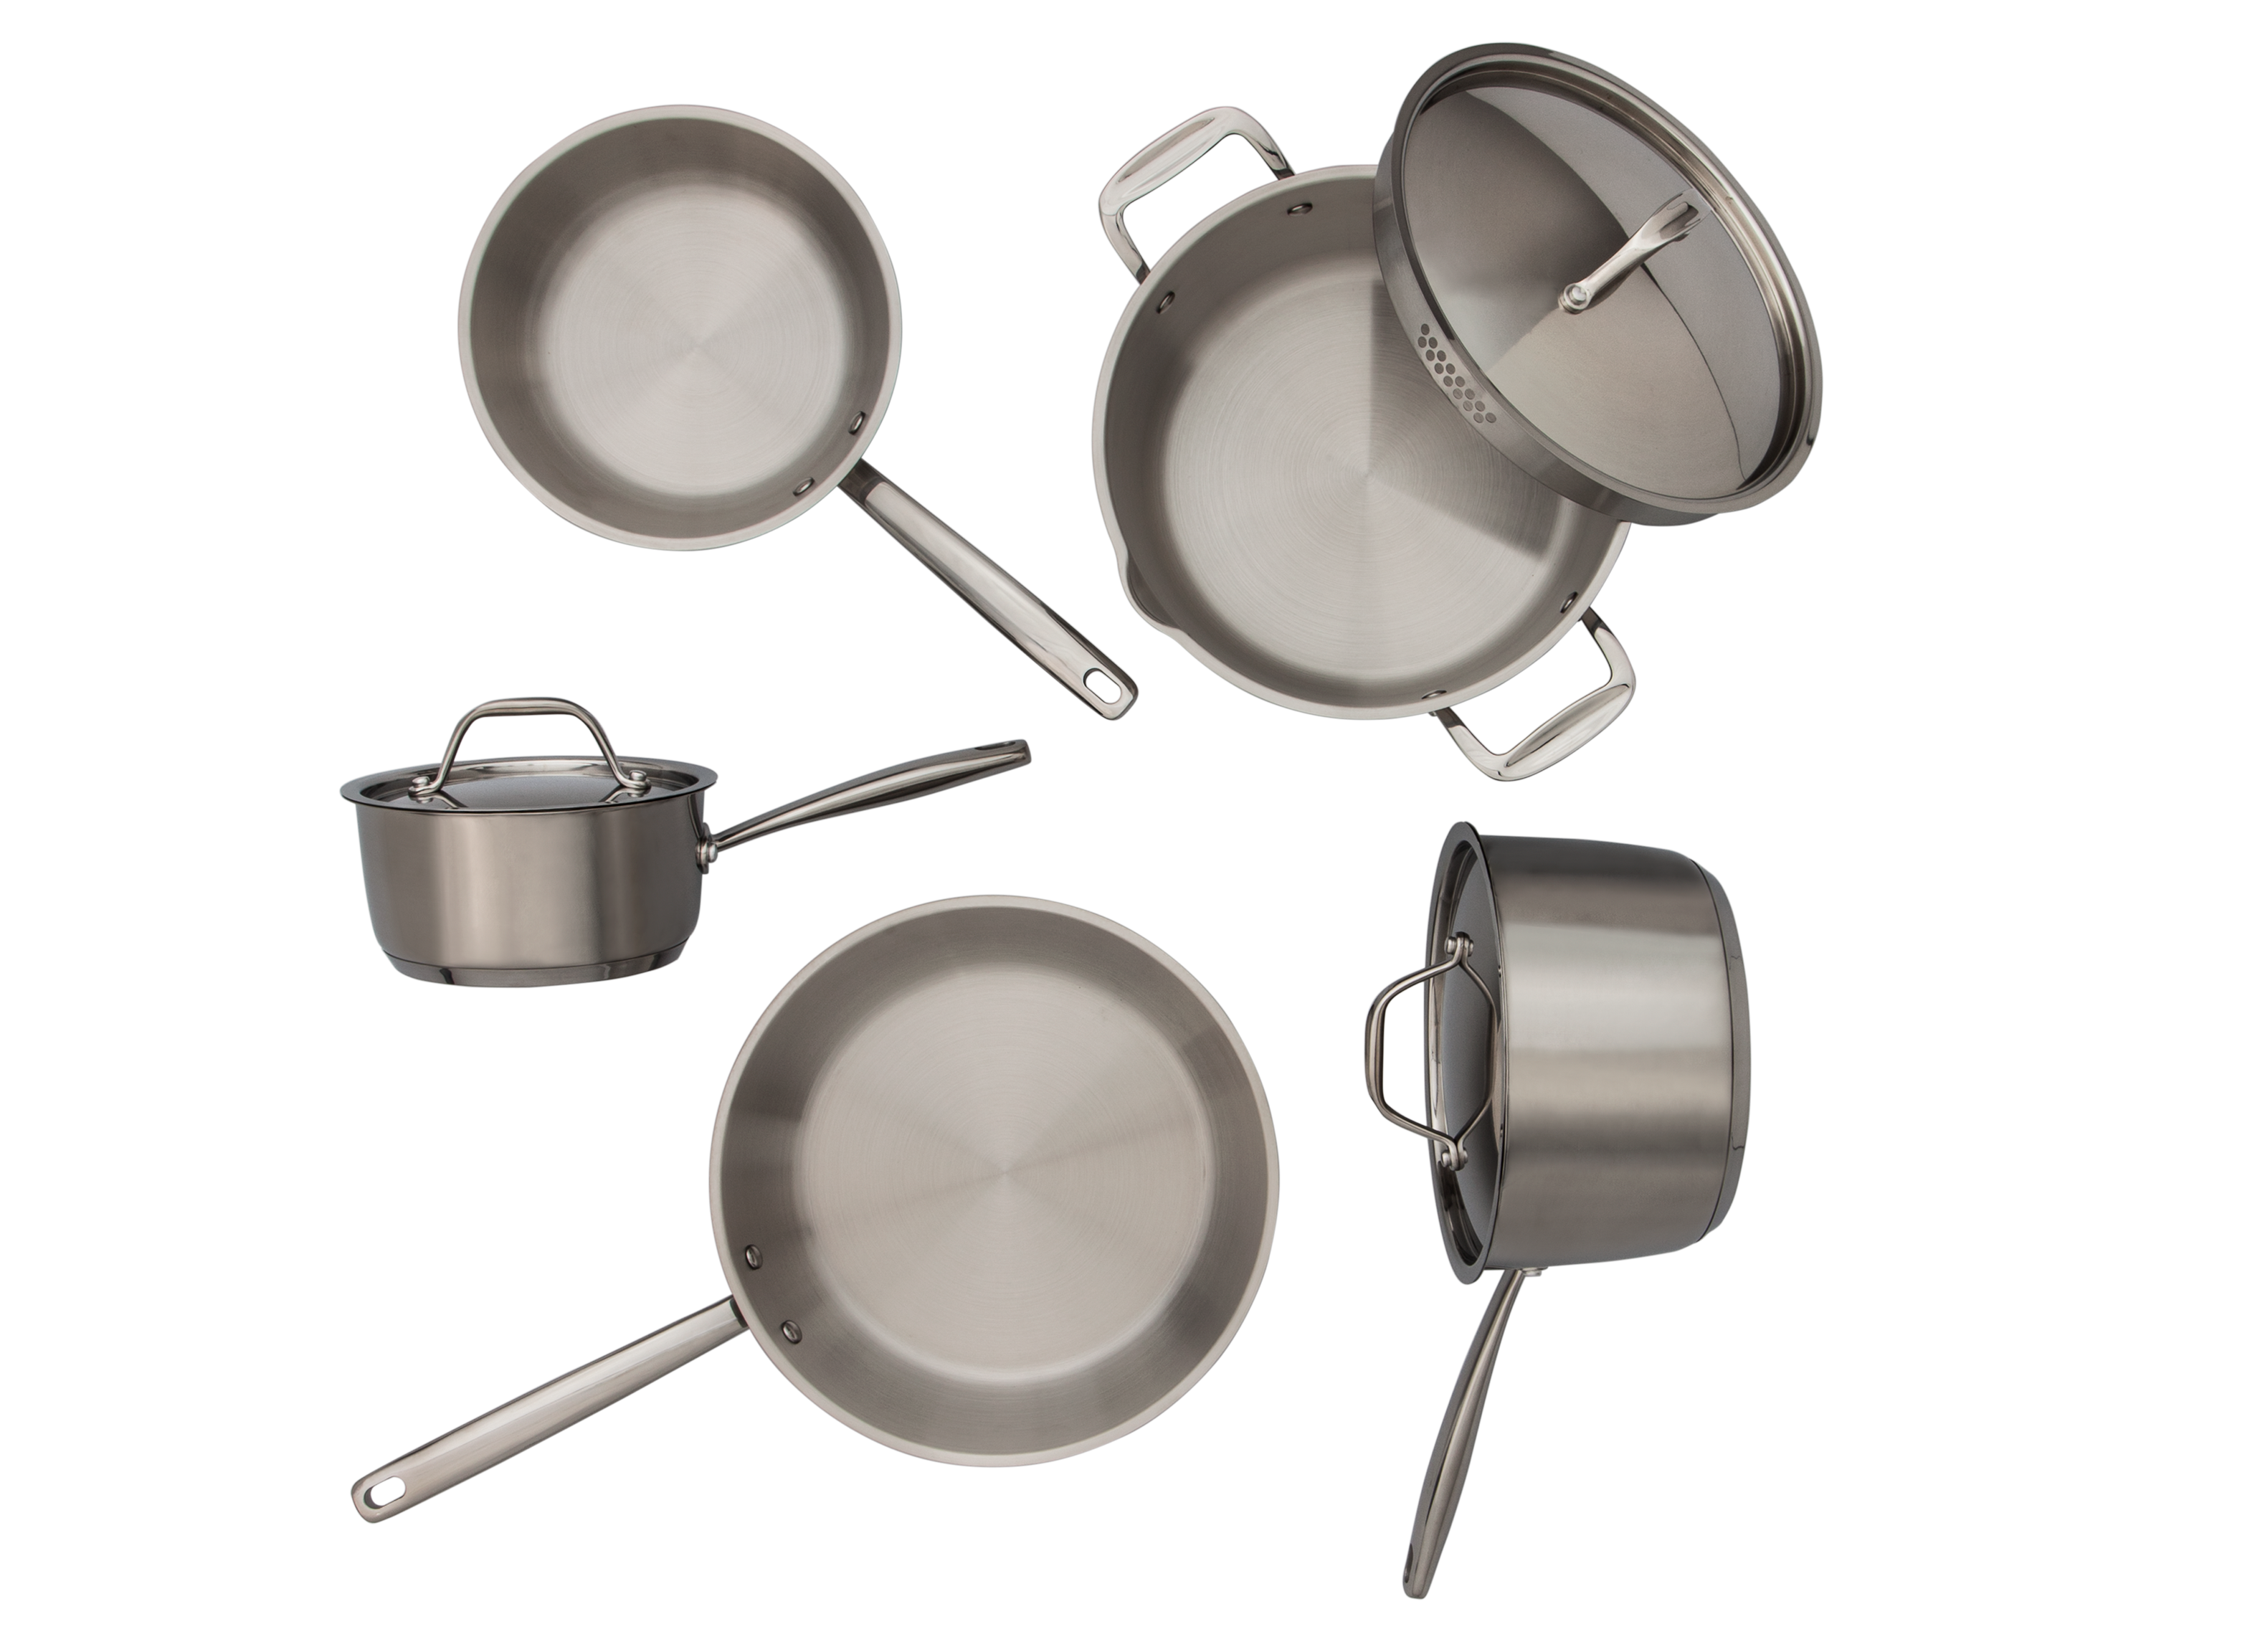 Stainless Steel Cookware Set 11pc - Made By Design™